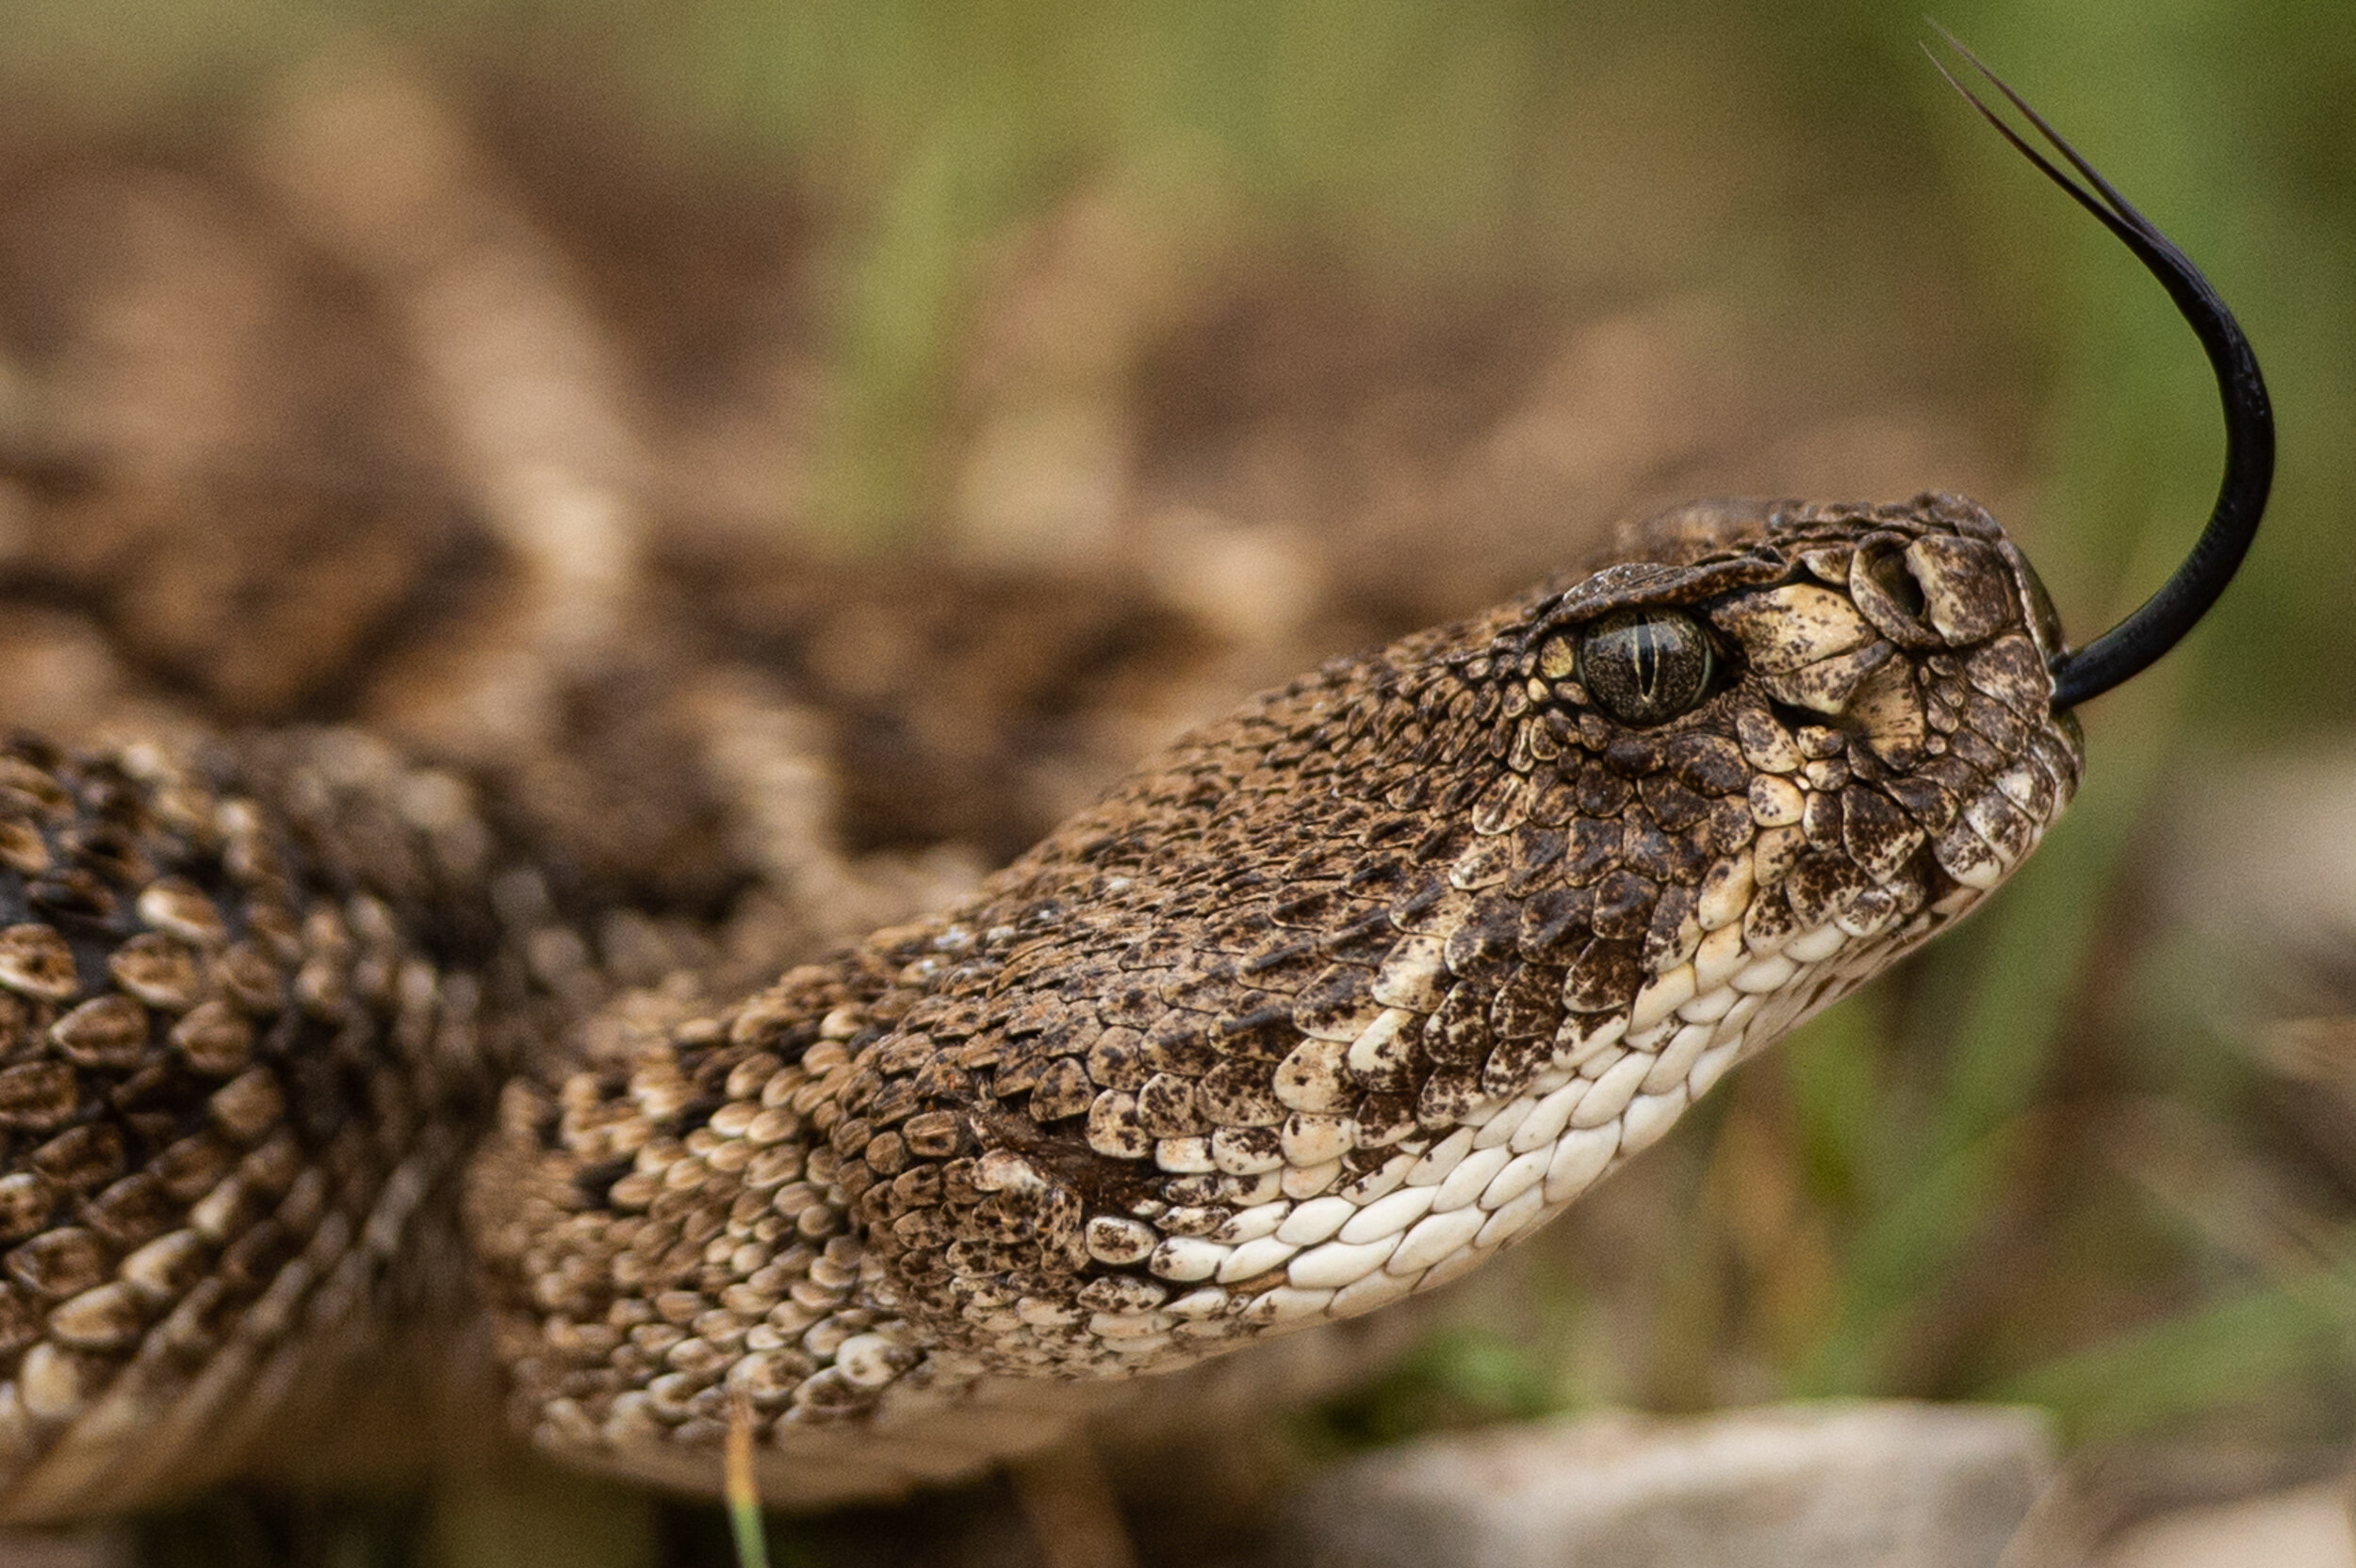  A Western Diamondback rattlesnake hisses and shakes its rattle on Wednesday, May 19, 2021, in Junction, Texas. 